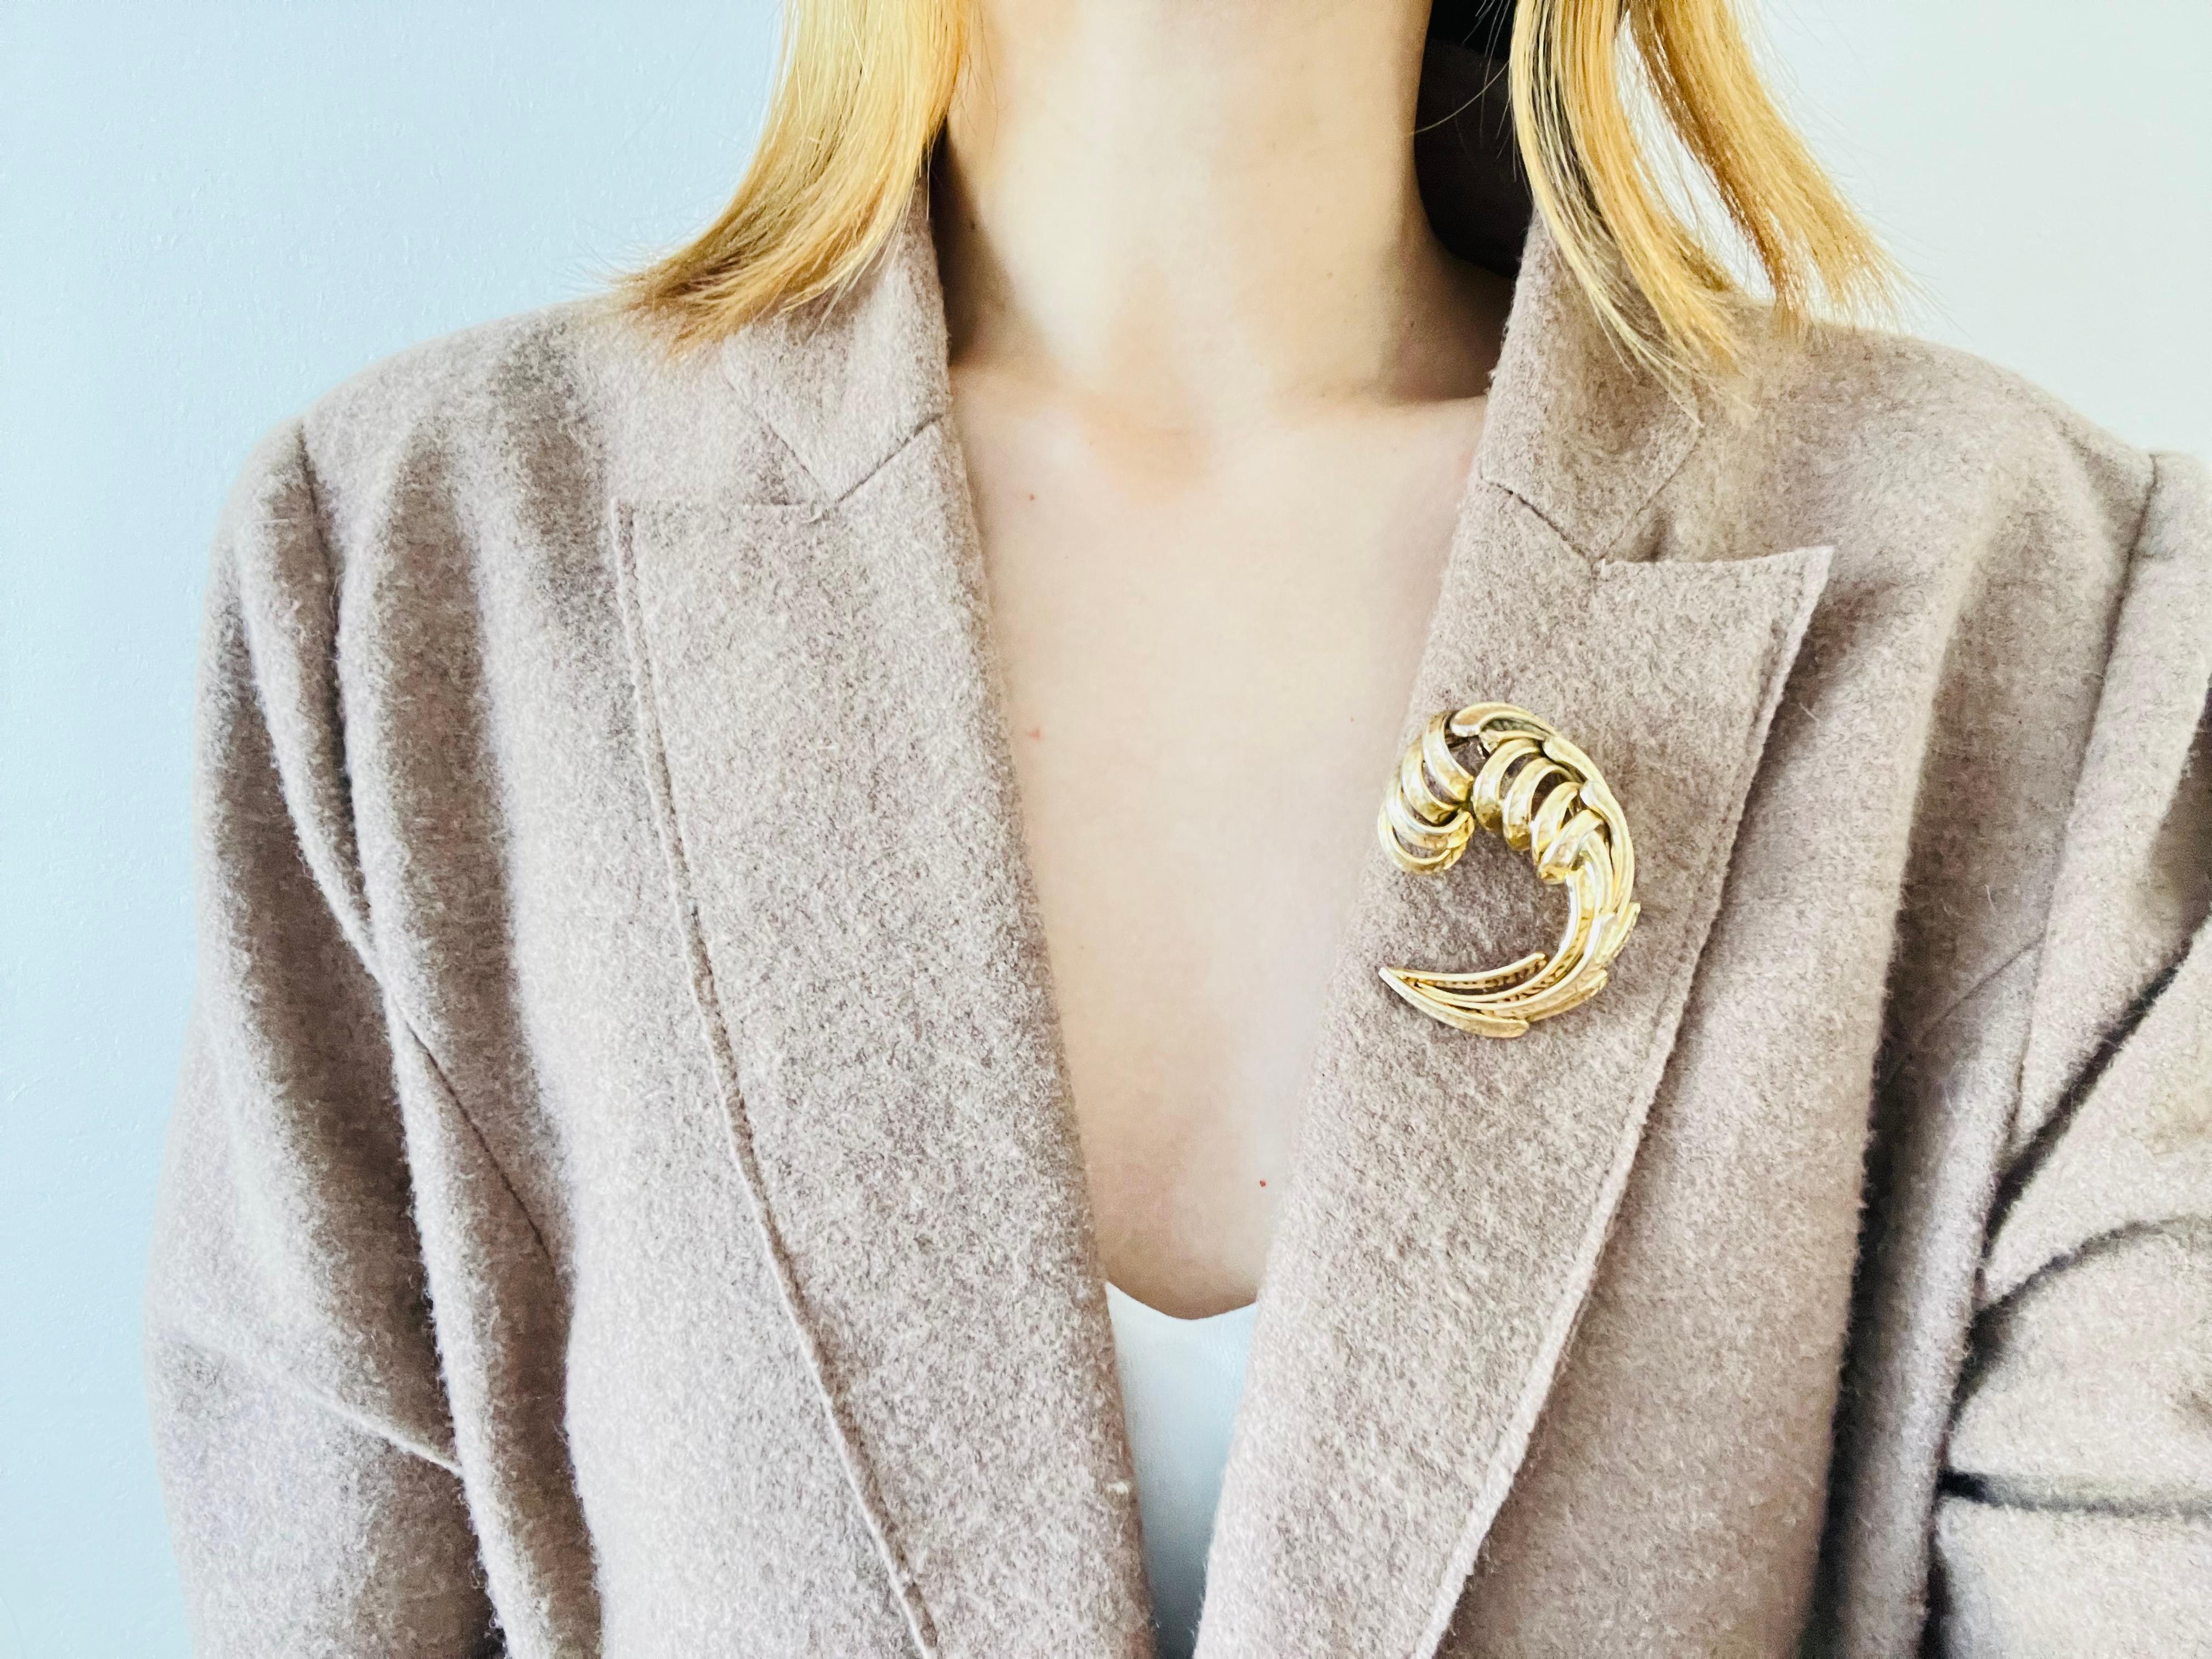 Christian Dior GROSSE 1959 Vintage Extra Large Openwork Swirl Twist Gold Brooch In Good Condition For Sale In Wokingham, England